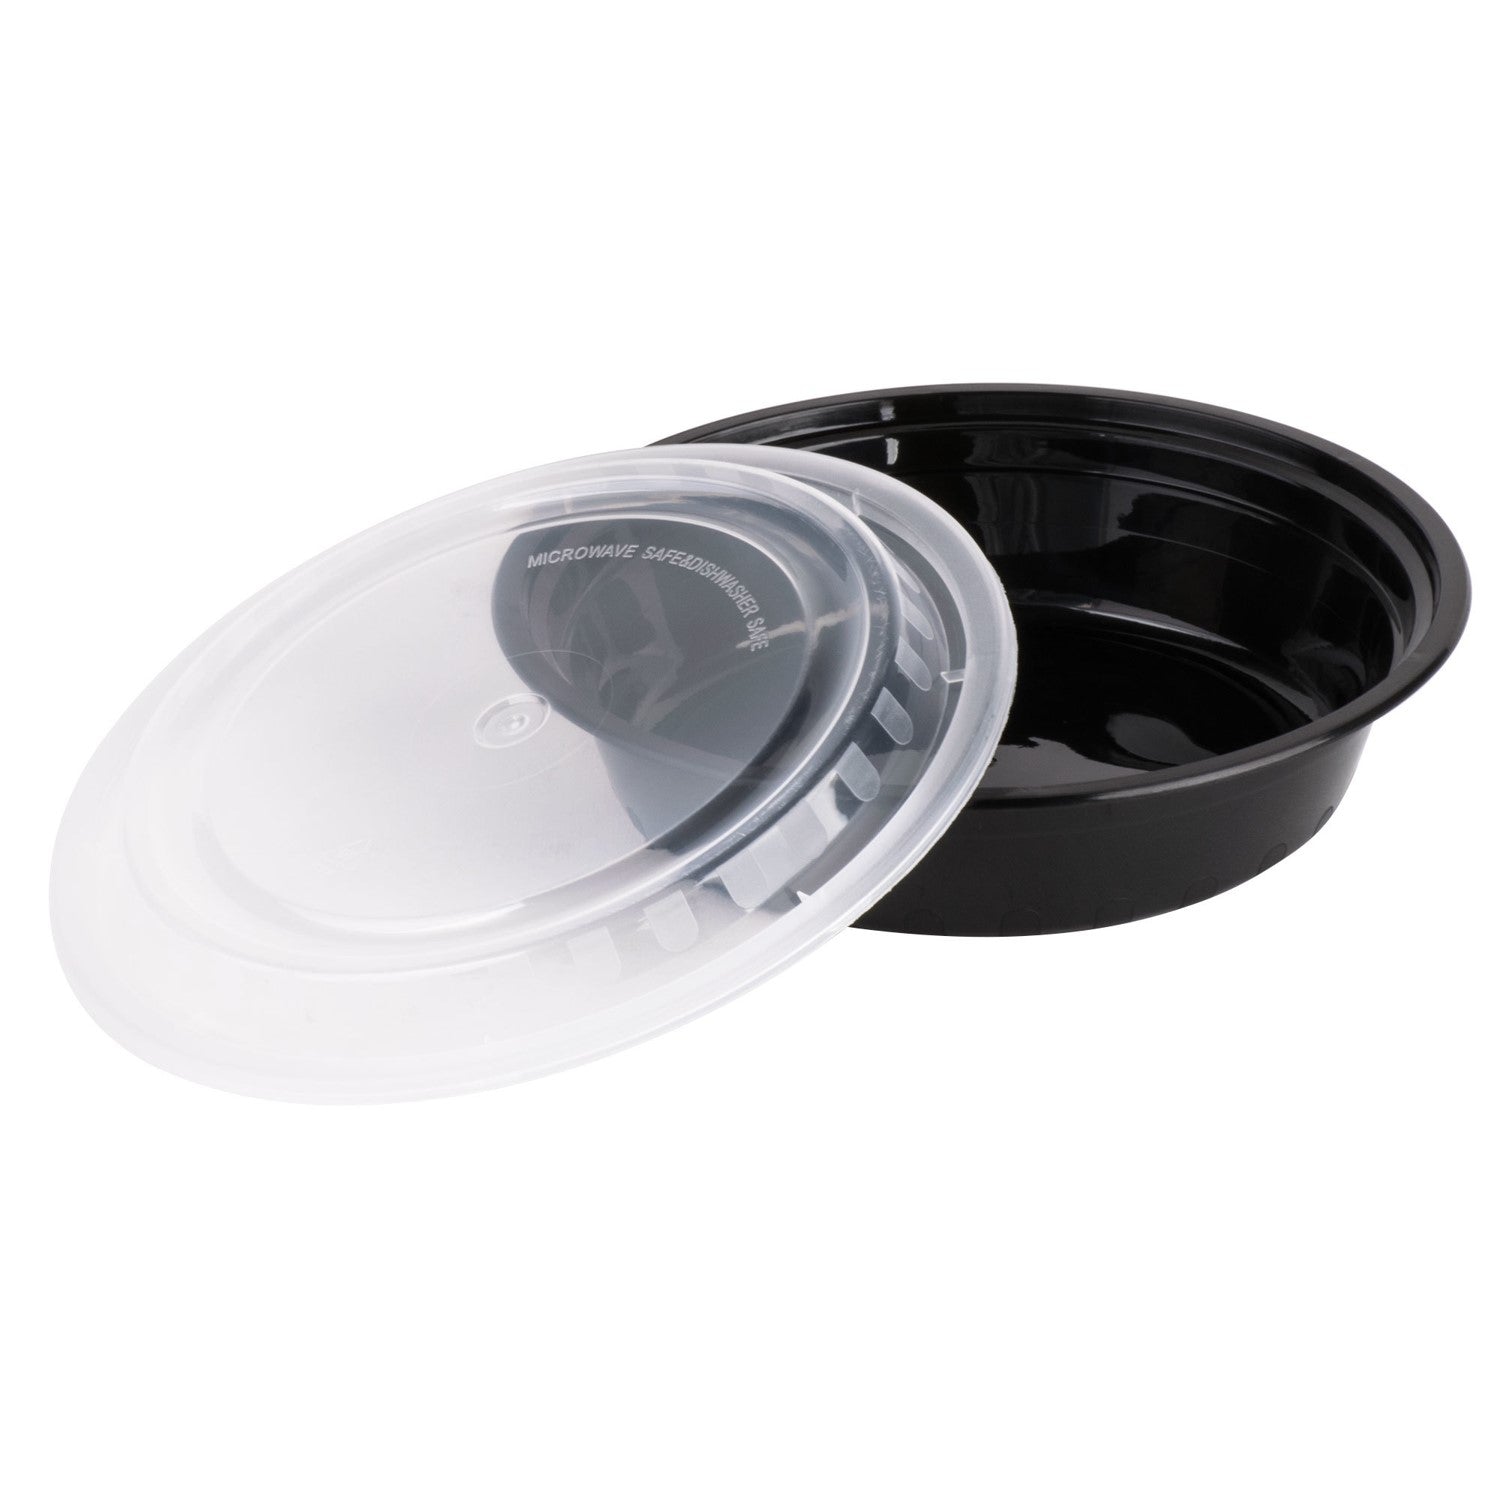 Black Plastic Container With Lid, 24oz - 2726917